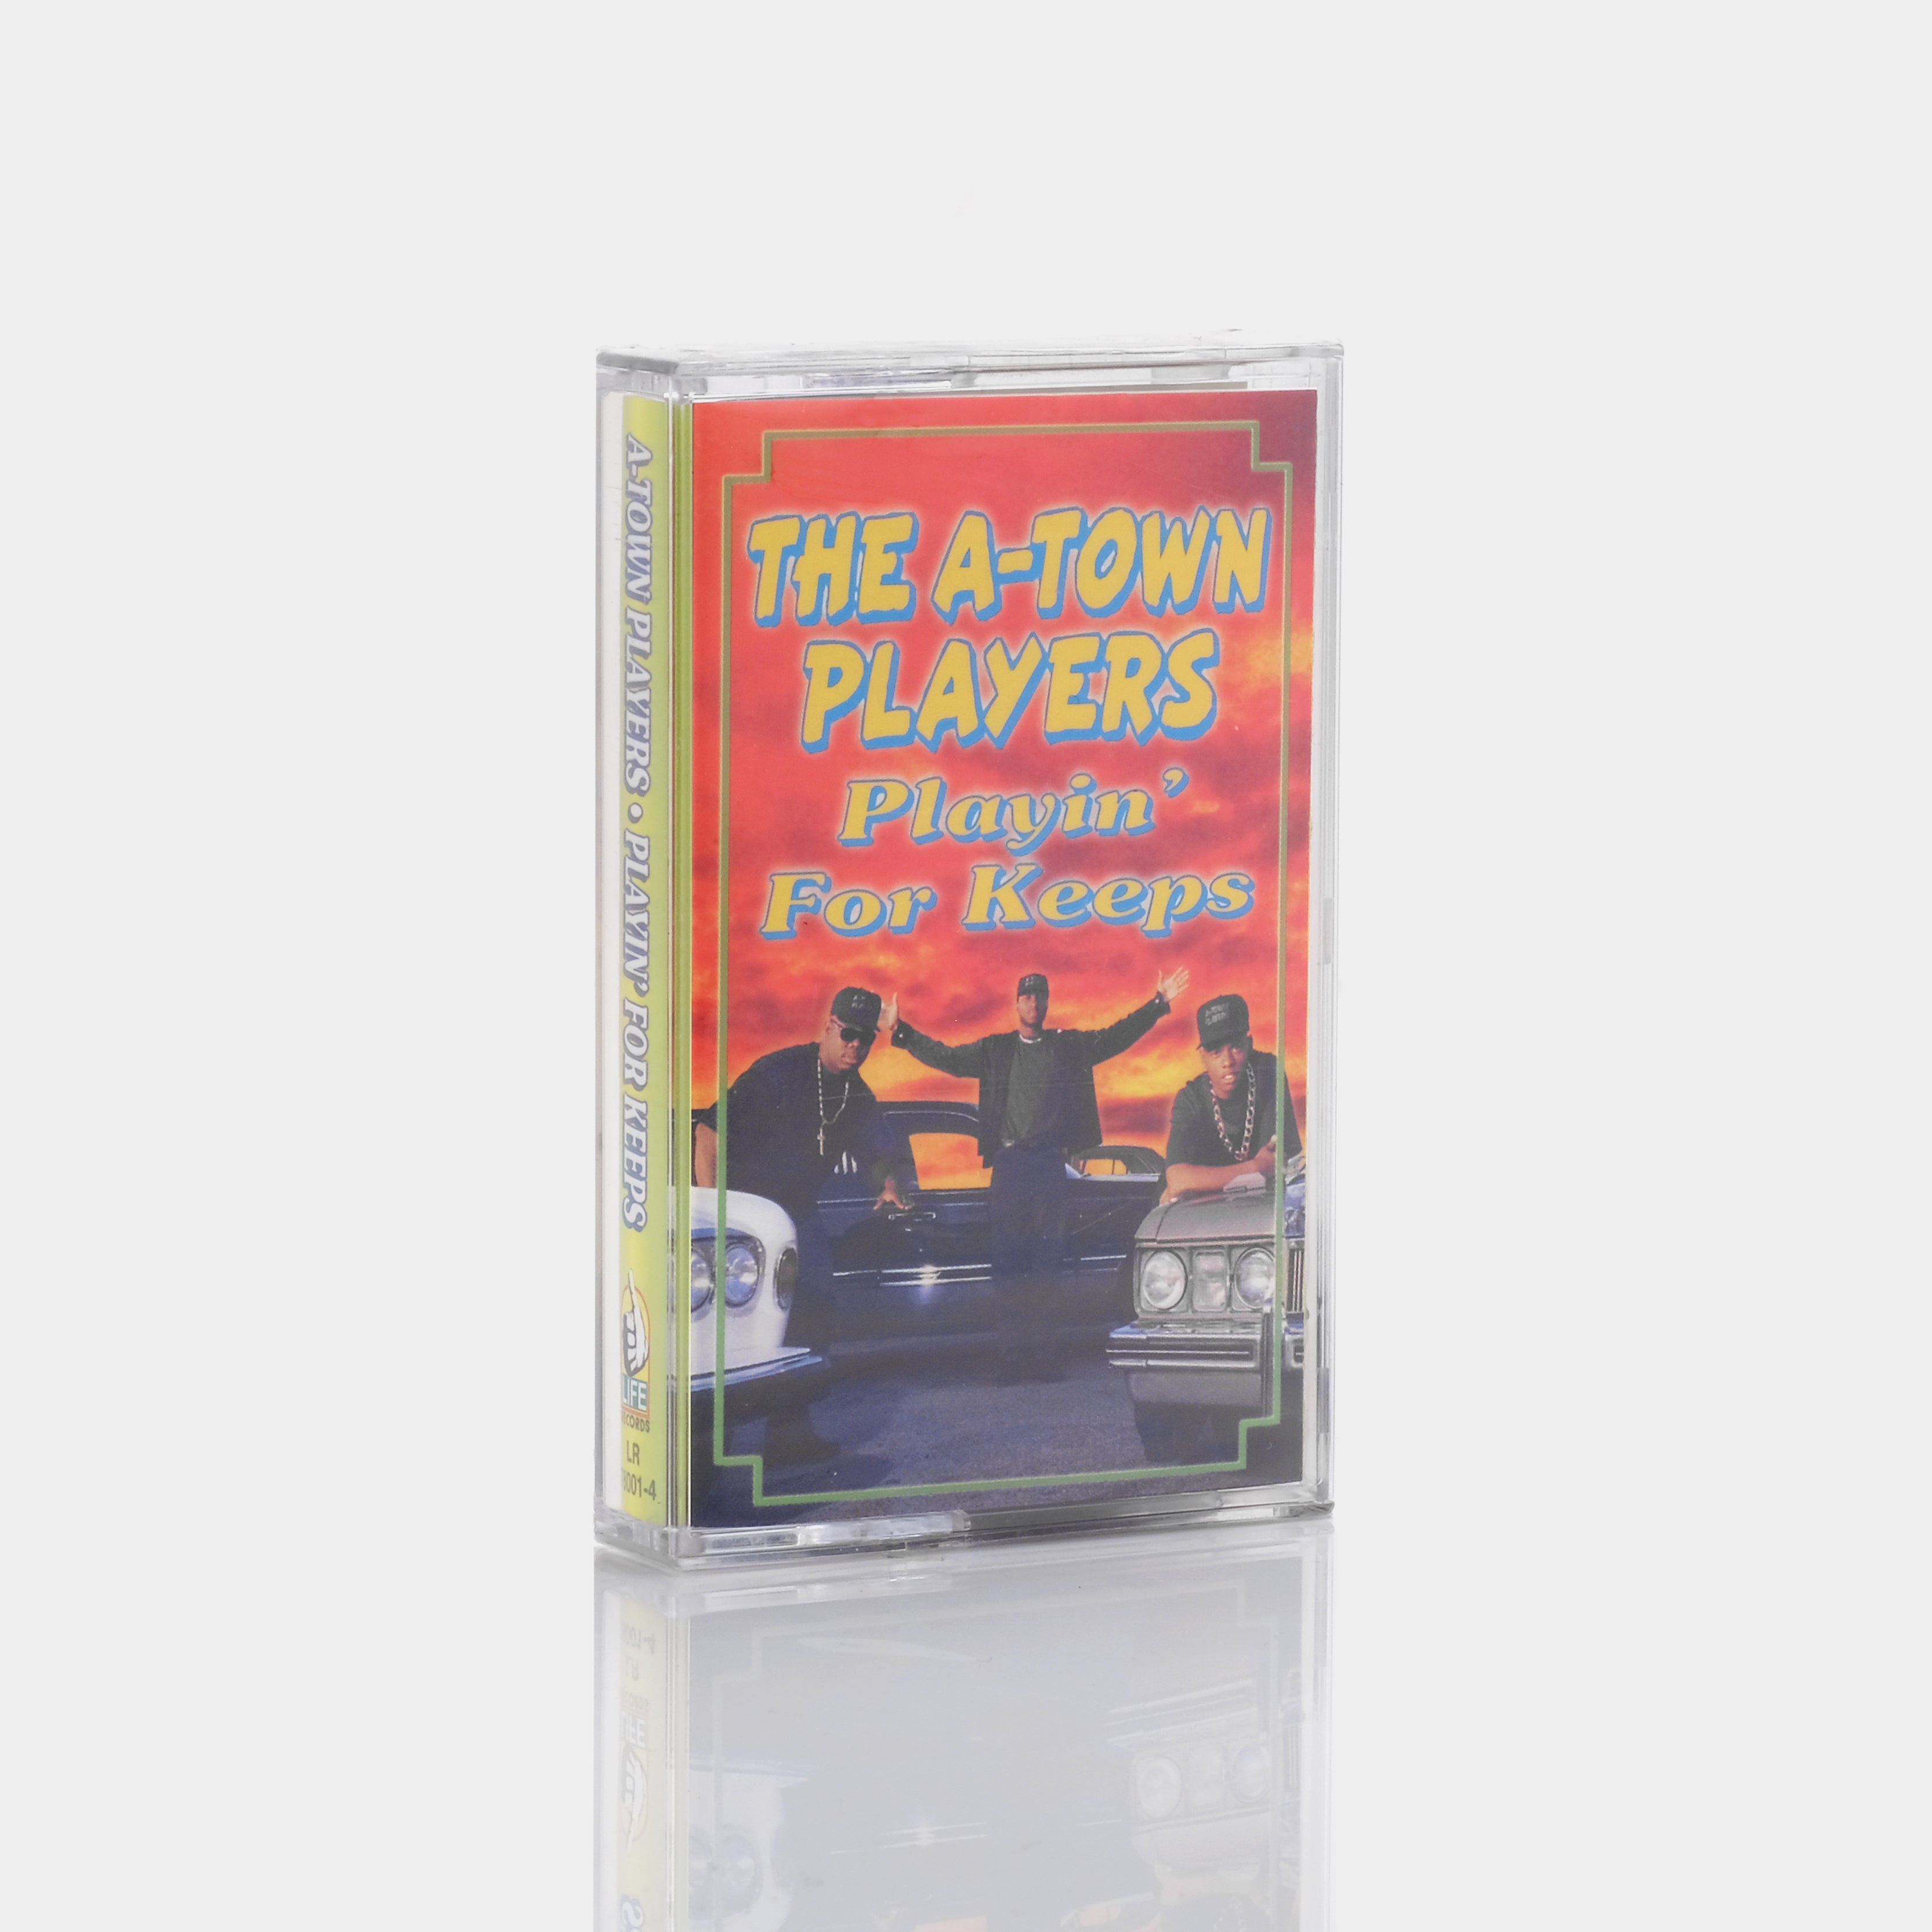 The A-Town Players - Playin' For Keeps Cassette Tape